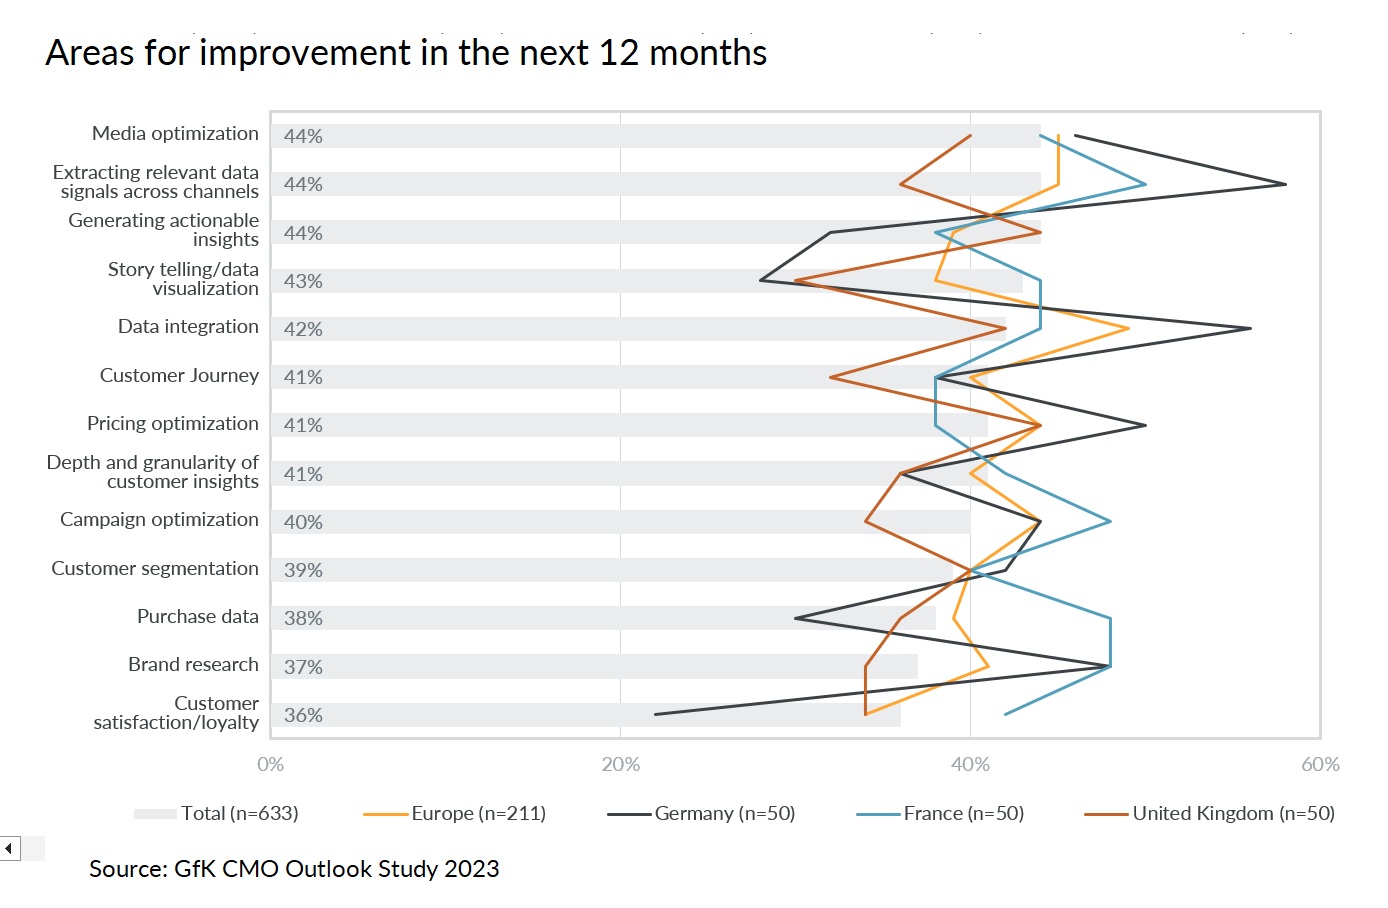 Chart_CMO_areas for improvement next 12 months_Europe.jpg